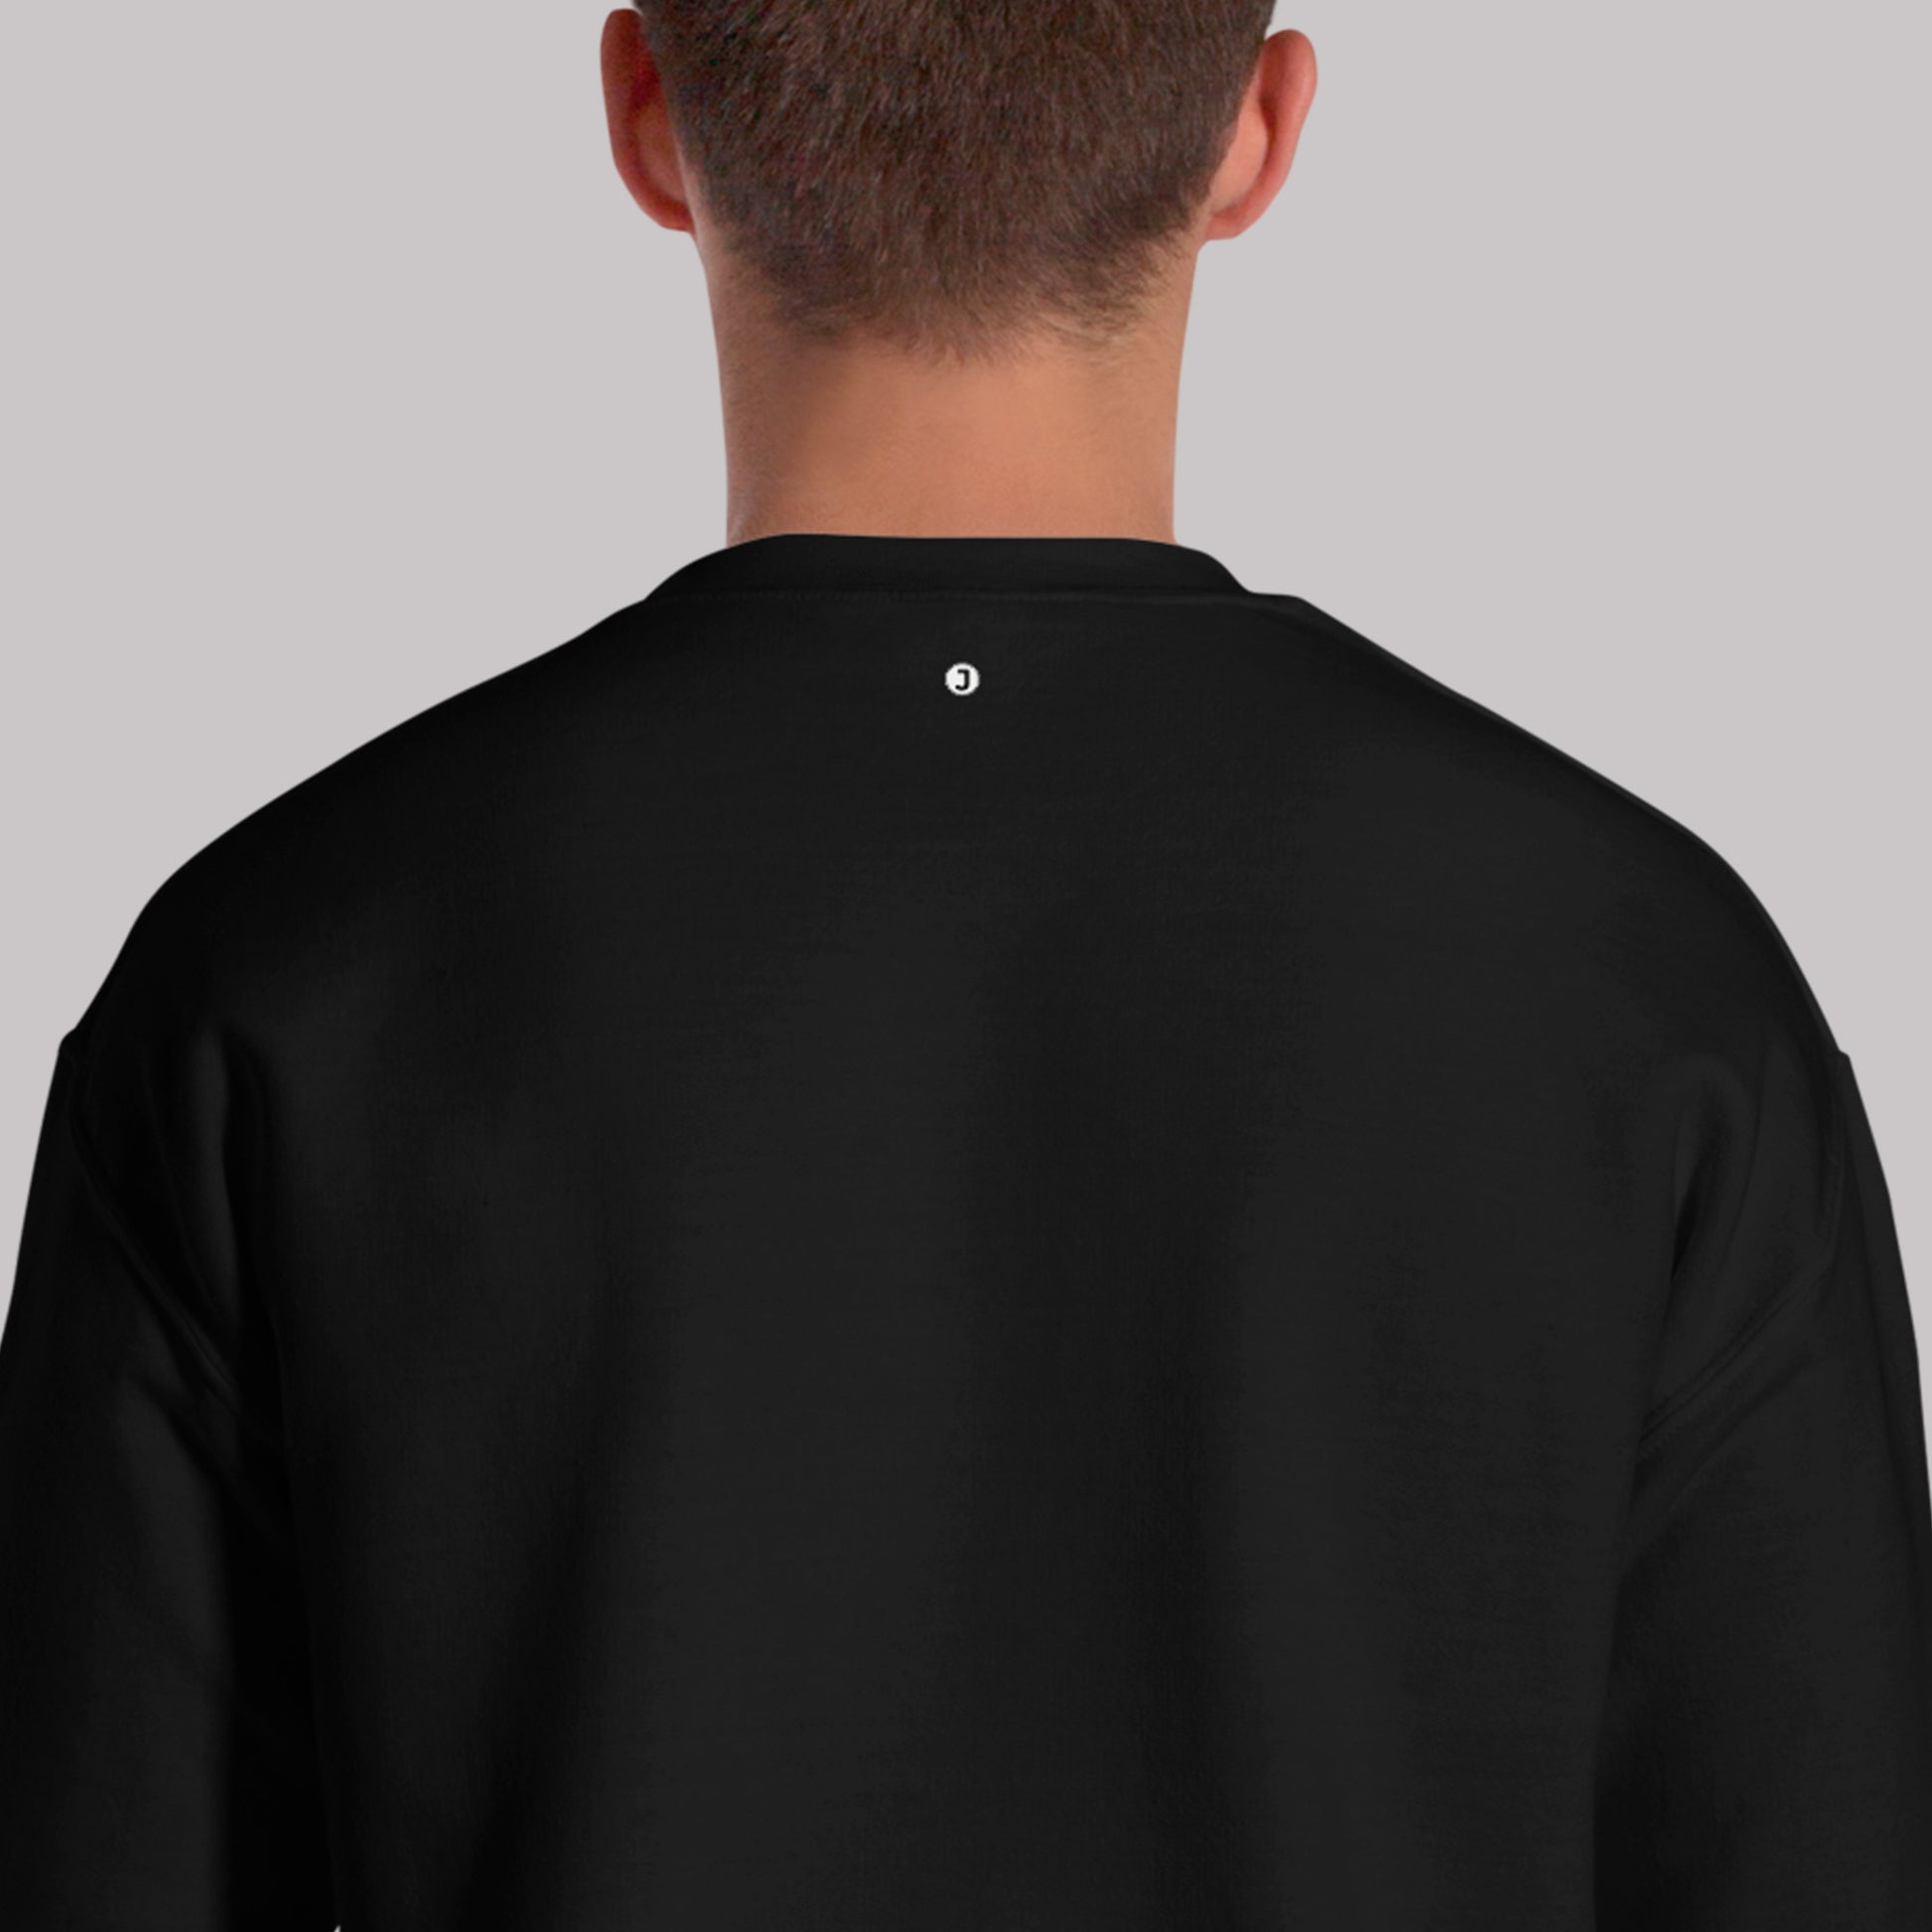 back view of Bamboo Melodies Unisex Sweatshirt